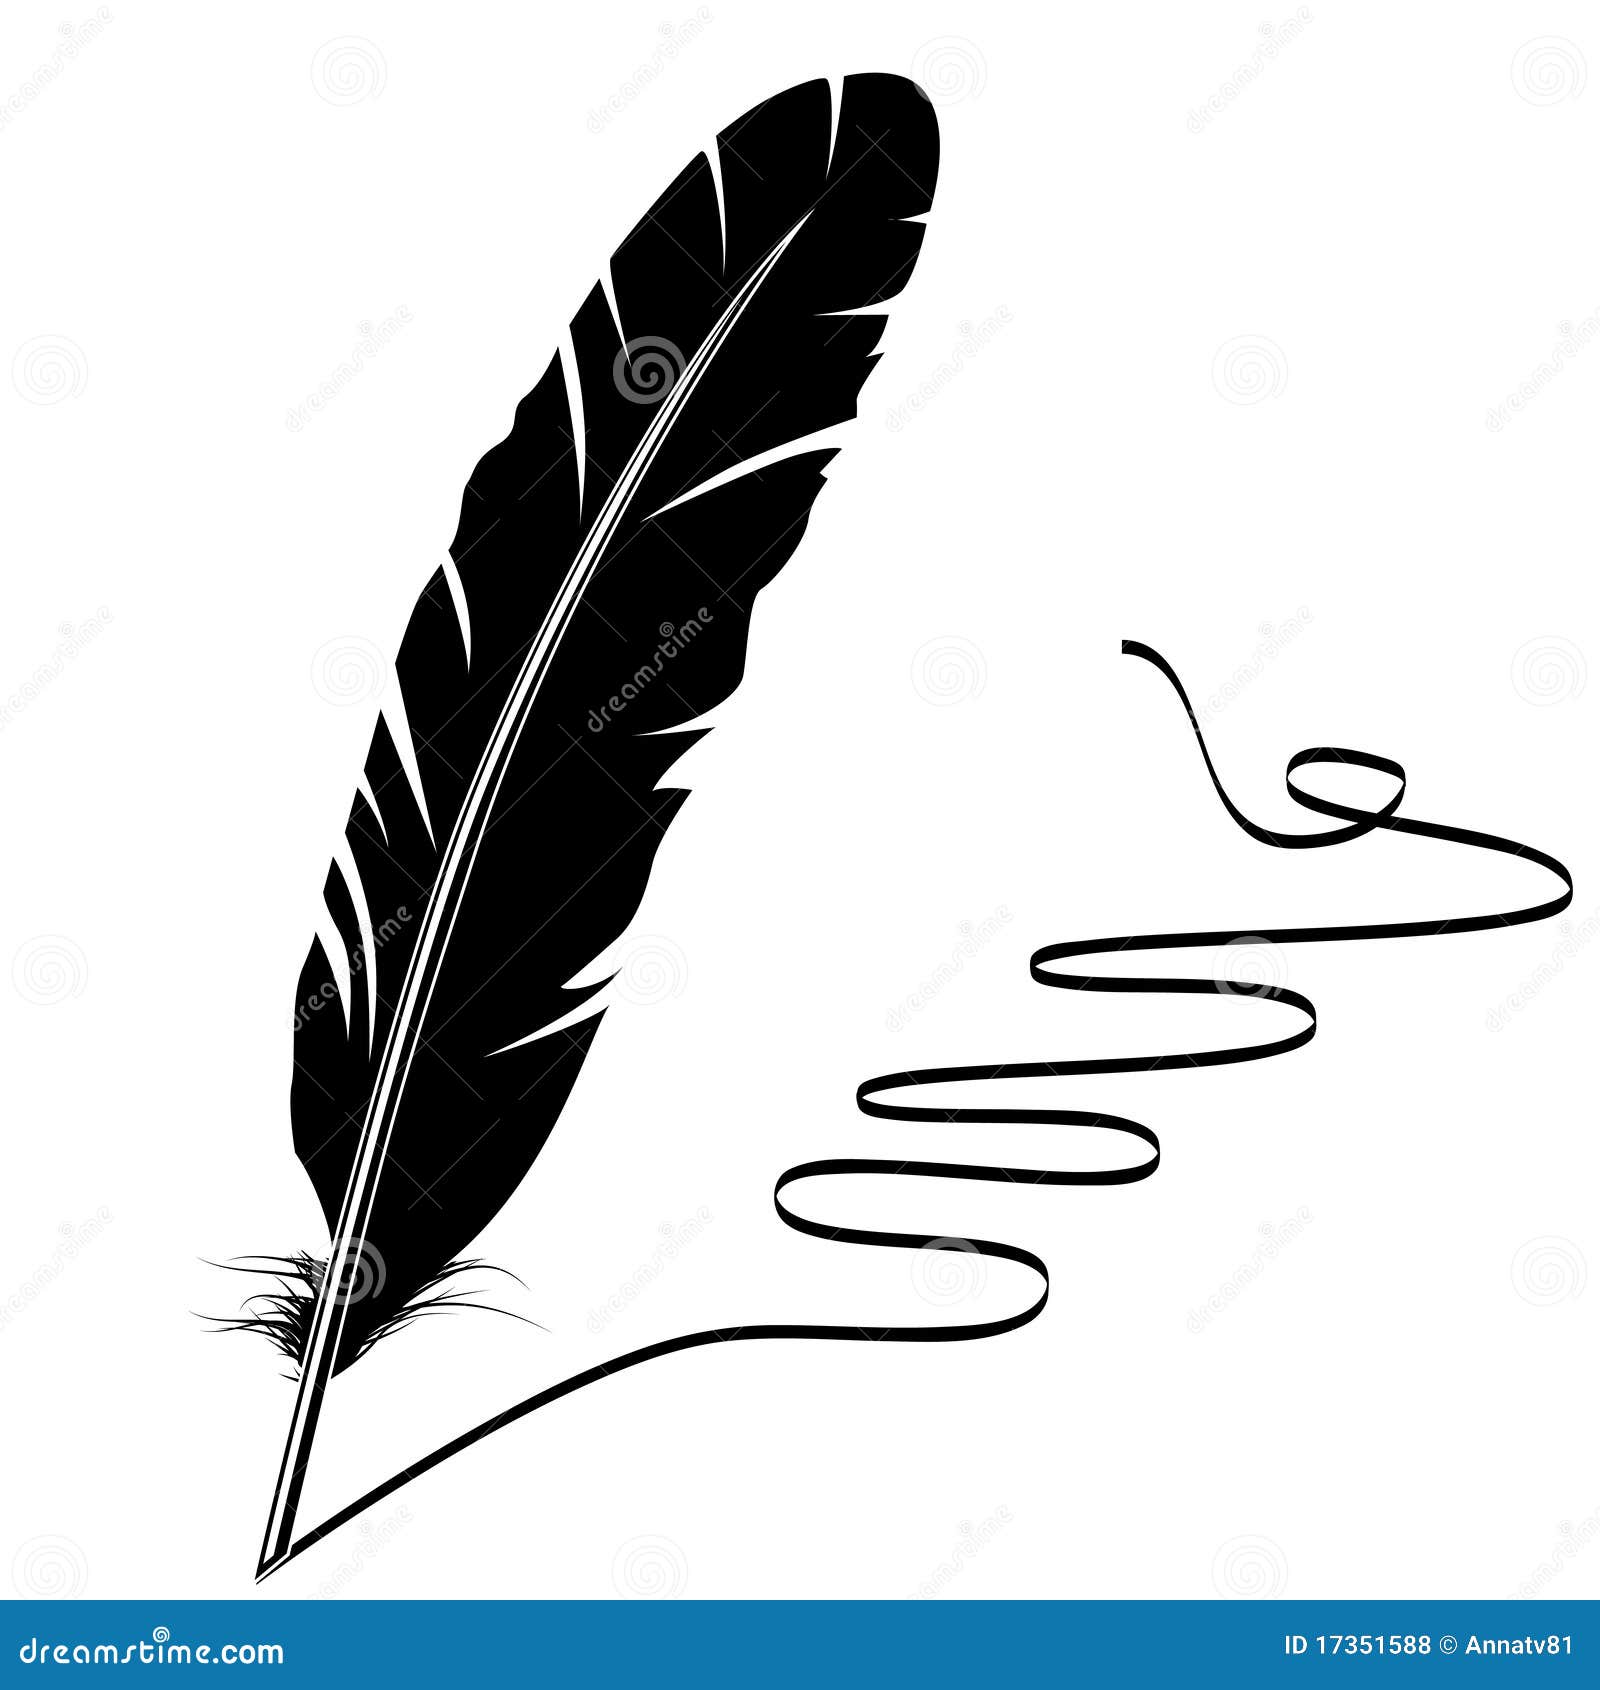 22,108 Black White Quill Ink Royalty-Free Images, Stock Photos